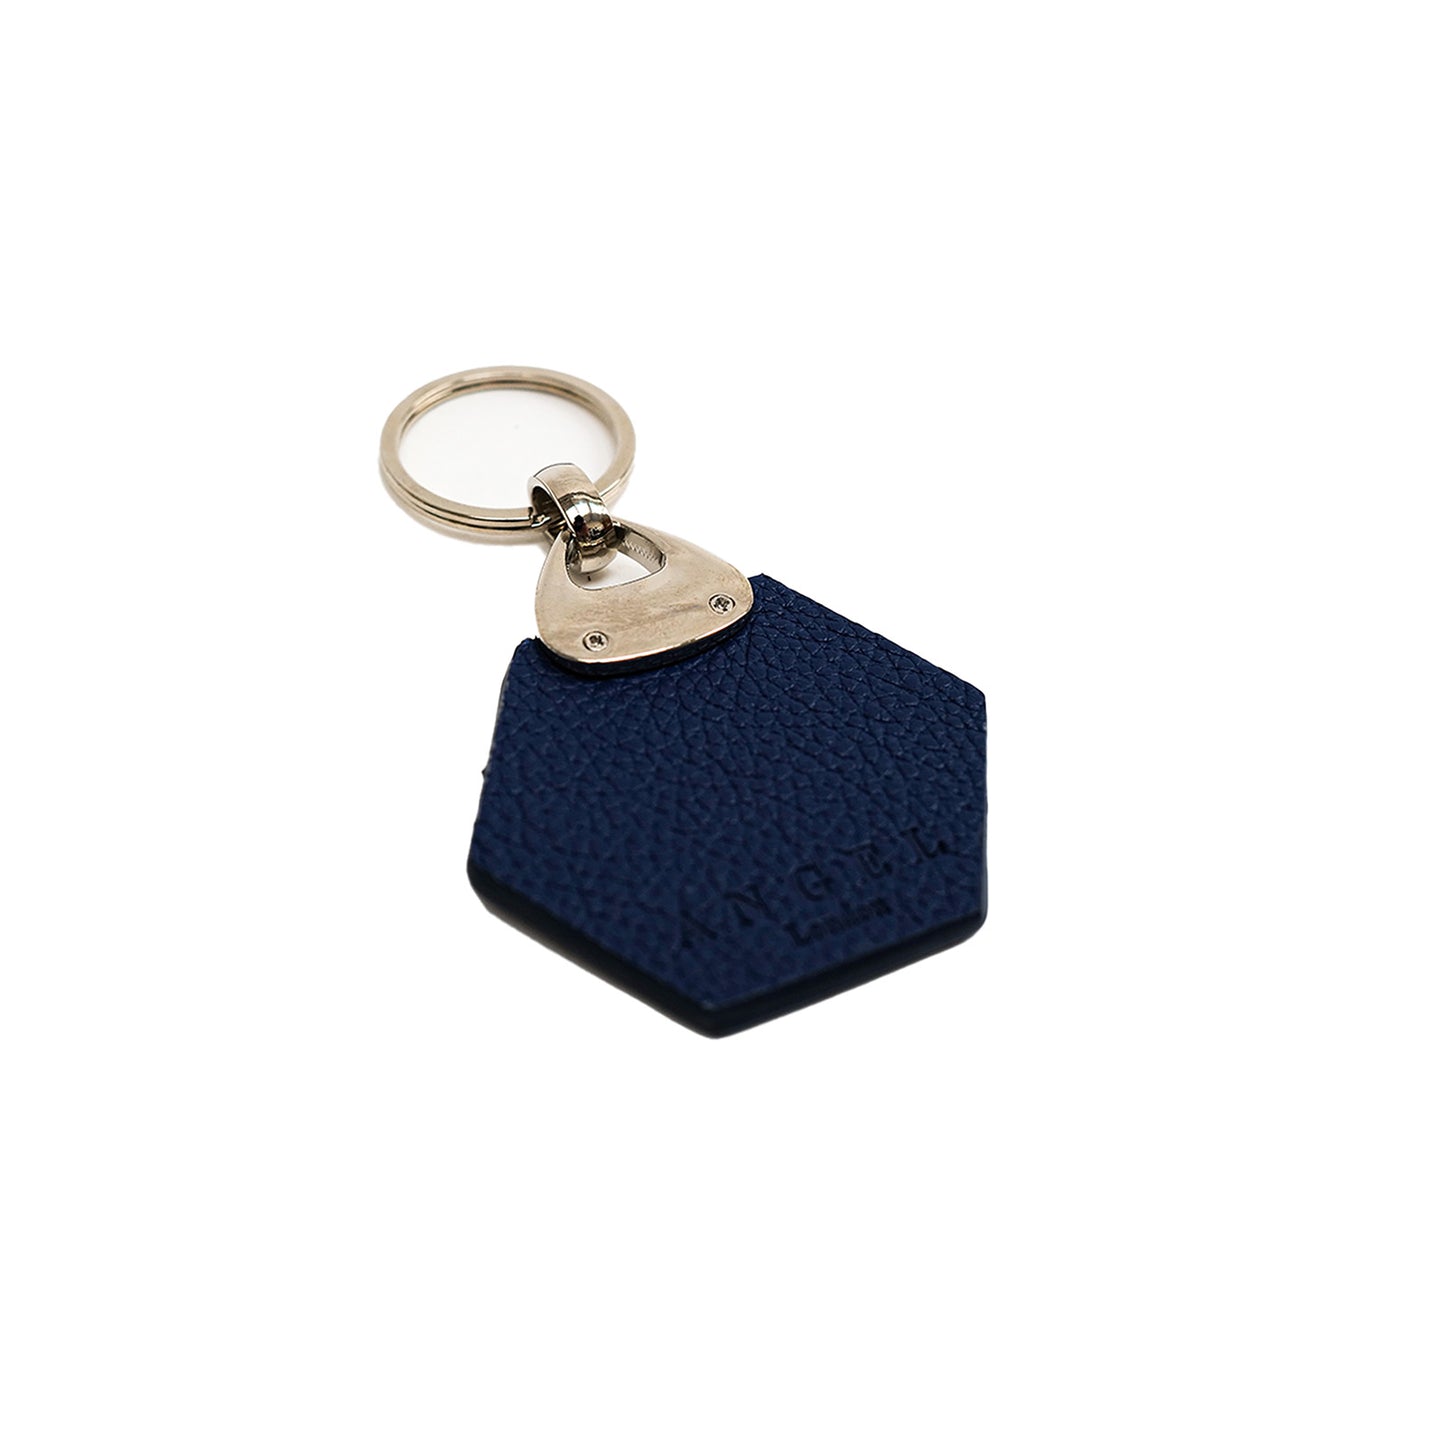 The Hex Key Ring